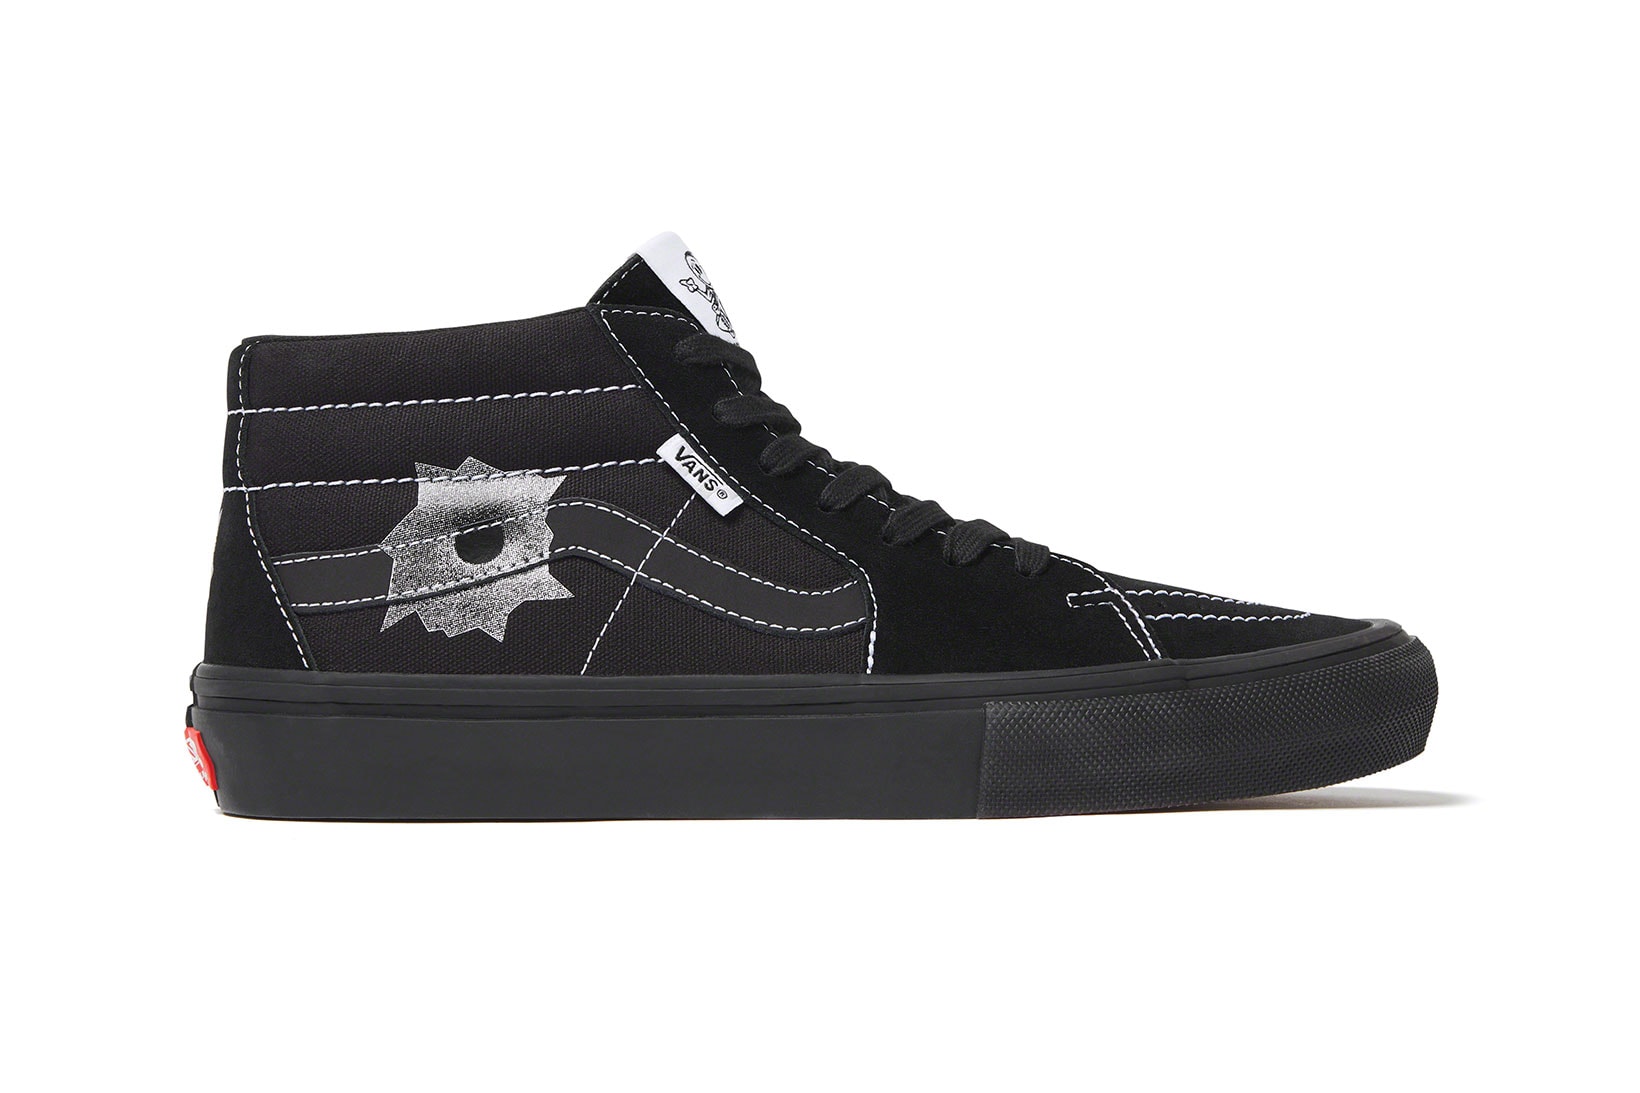 Supreme Vans Skate Grosso Mid Nate Lowman Collaboration Official Images Release Date